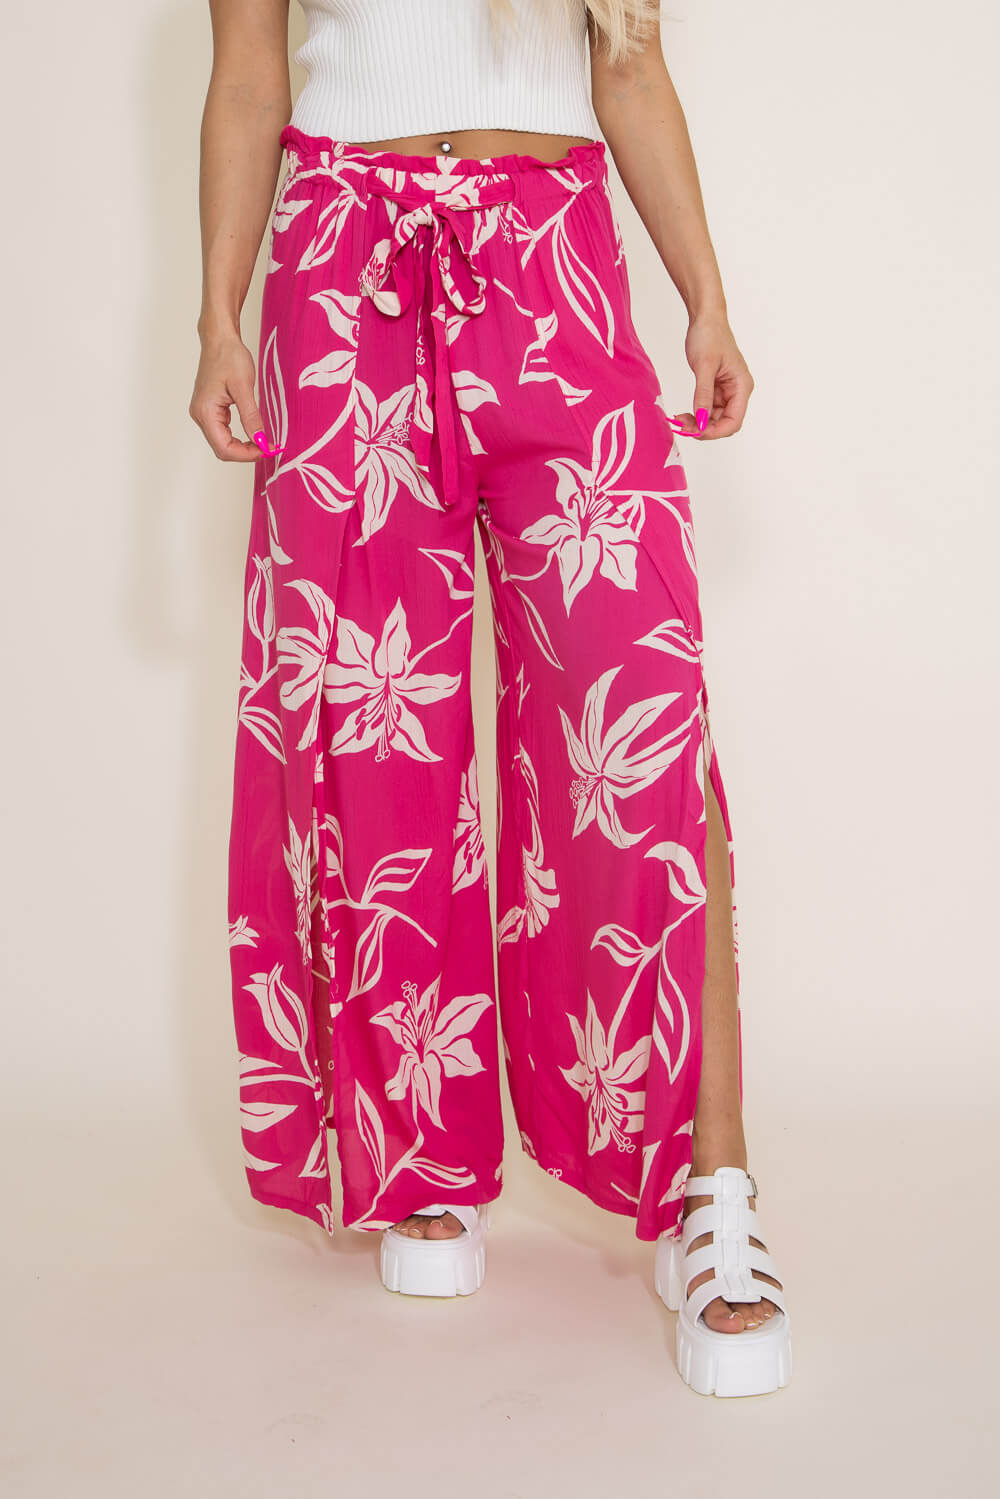 Angie Clothing Flare Floral Pants